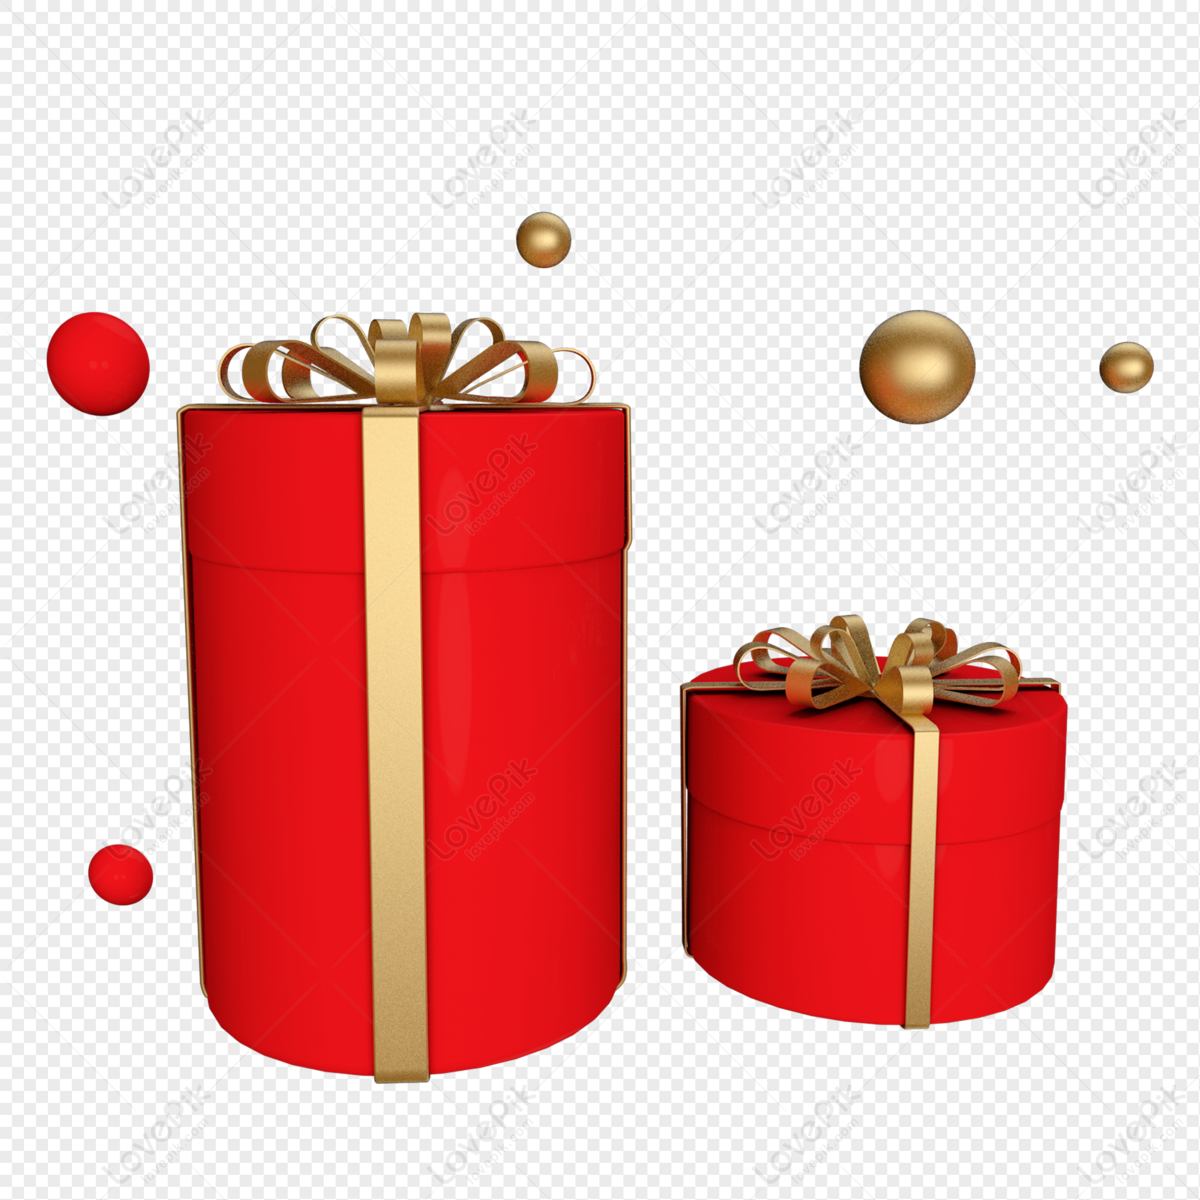 Round gift box. White blank open and closed... - Stock Illustration  [42802625] - PIXTA